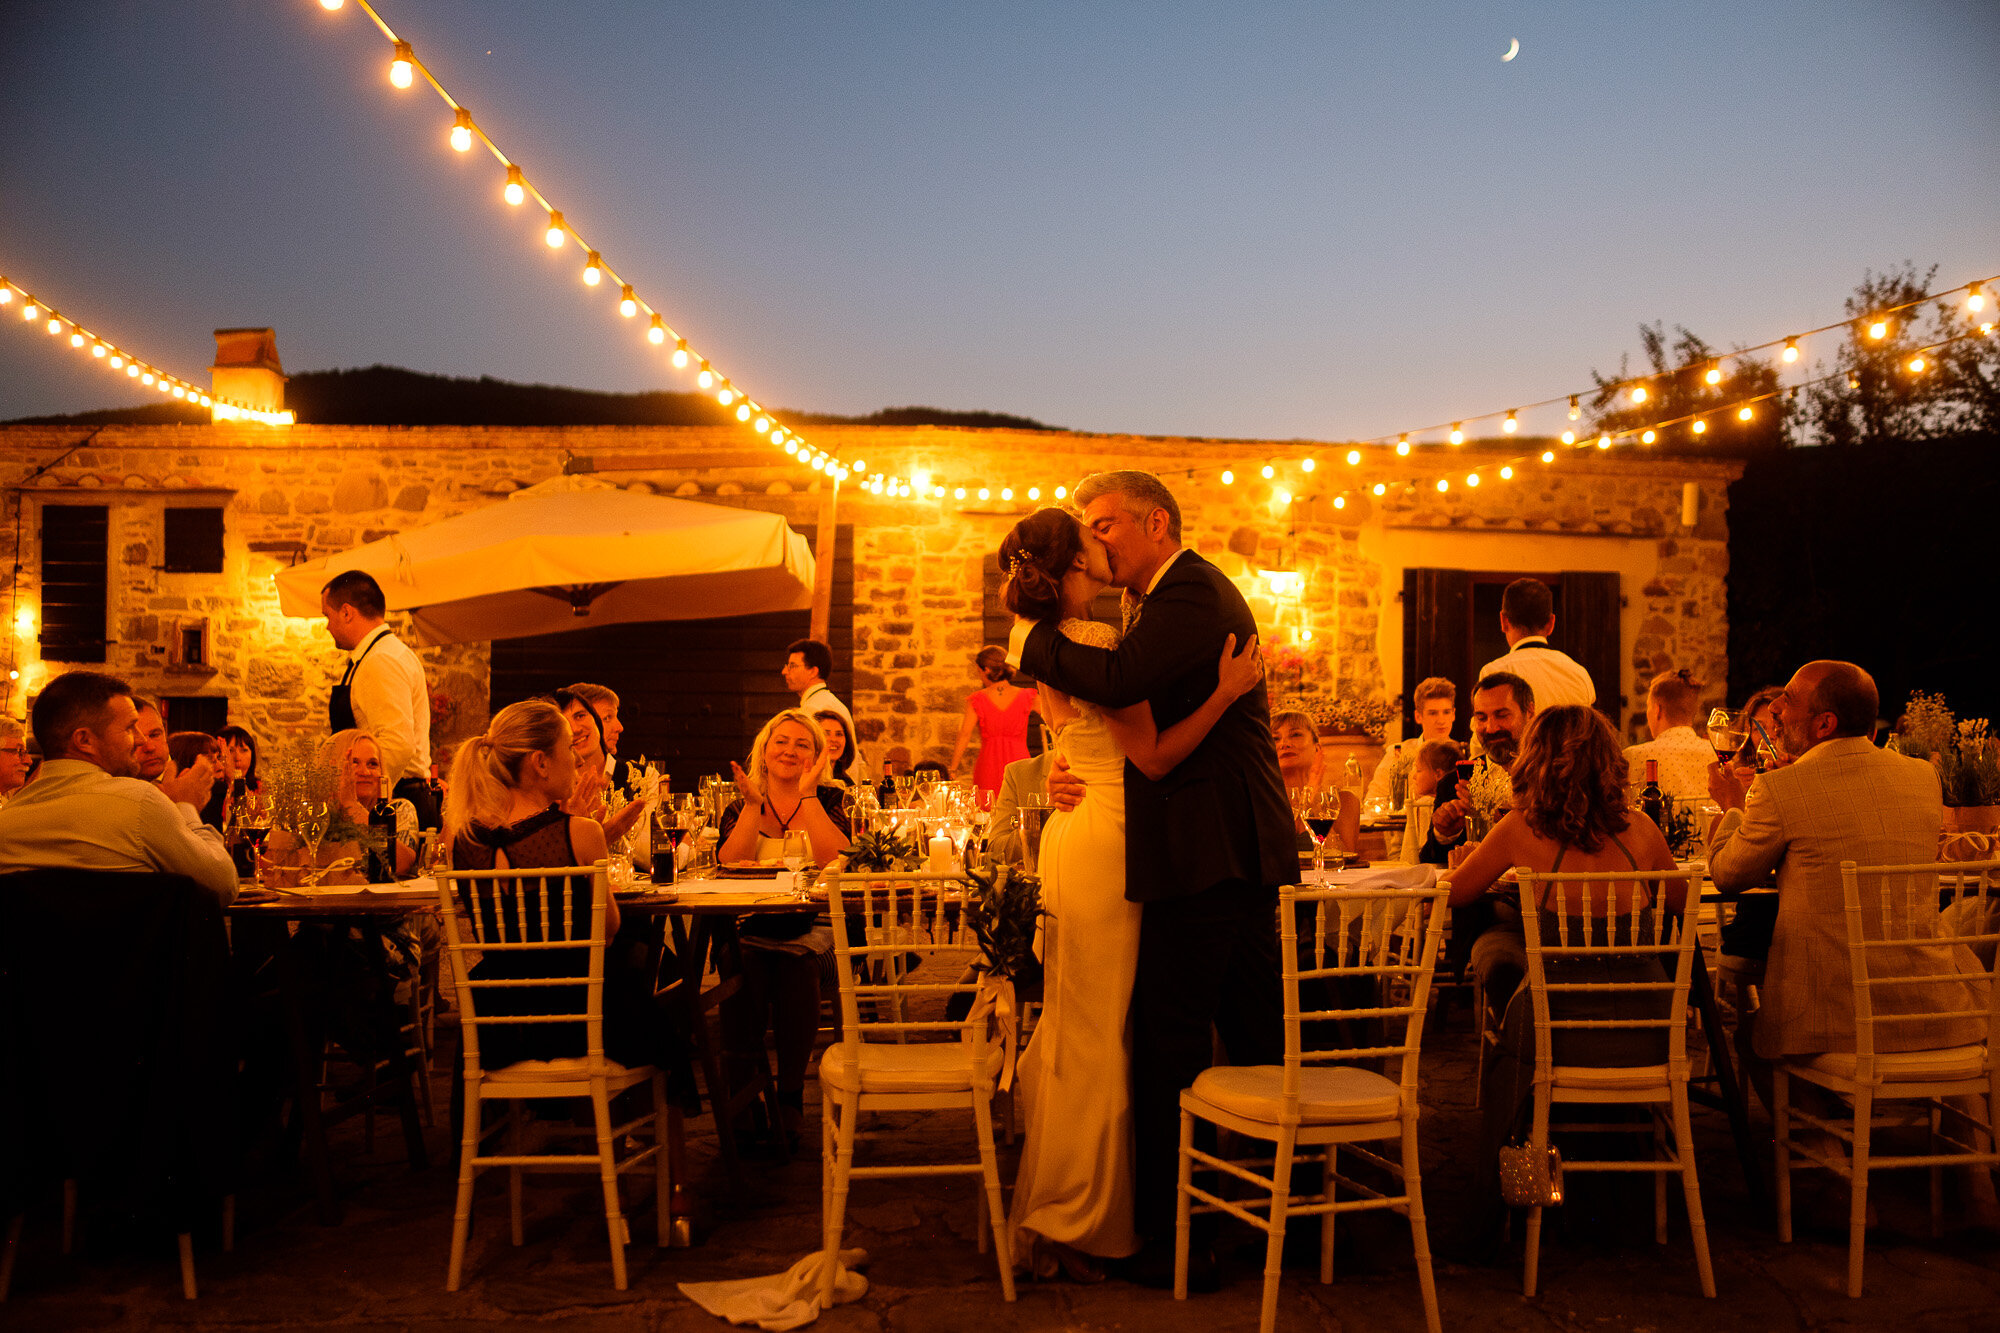  Elena + Steve share a kiss under the lights during their outdoor wedding reception at a villa in Tuscany, Italy during their destination wedding by wedding photographer Scott Wiliams (www.scottwilliamsphotographer.com) 